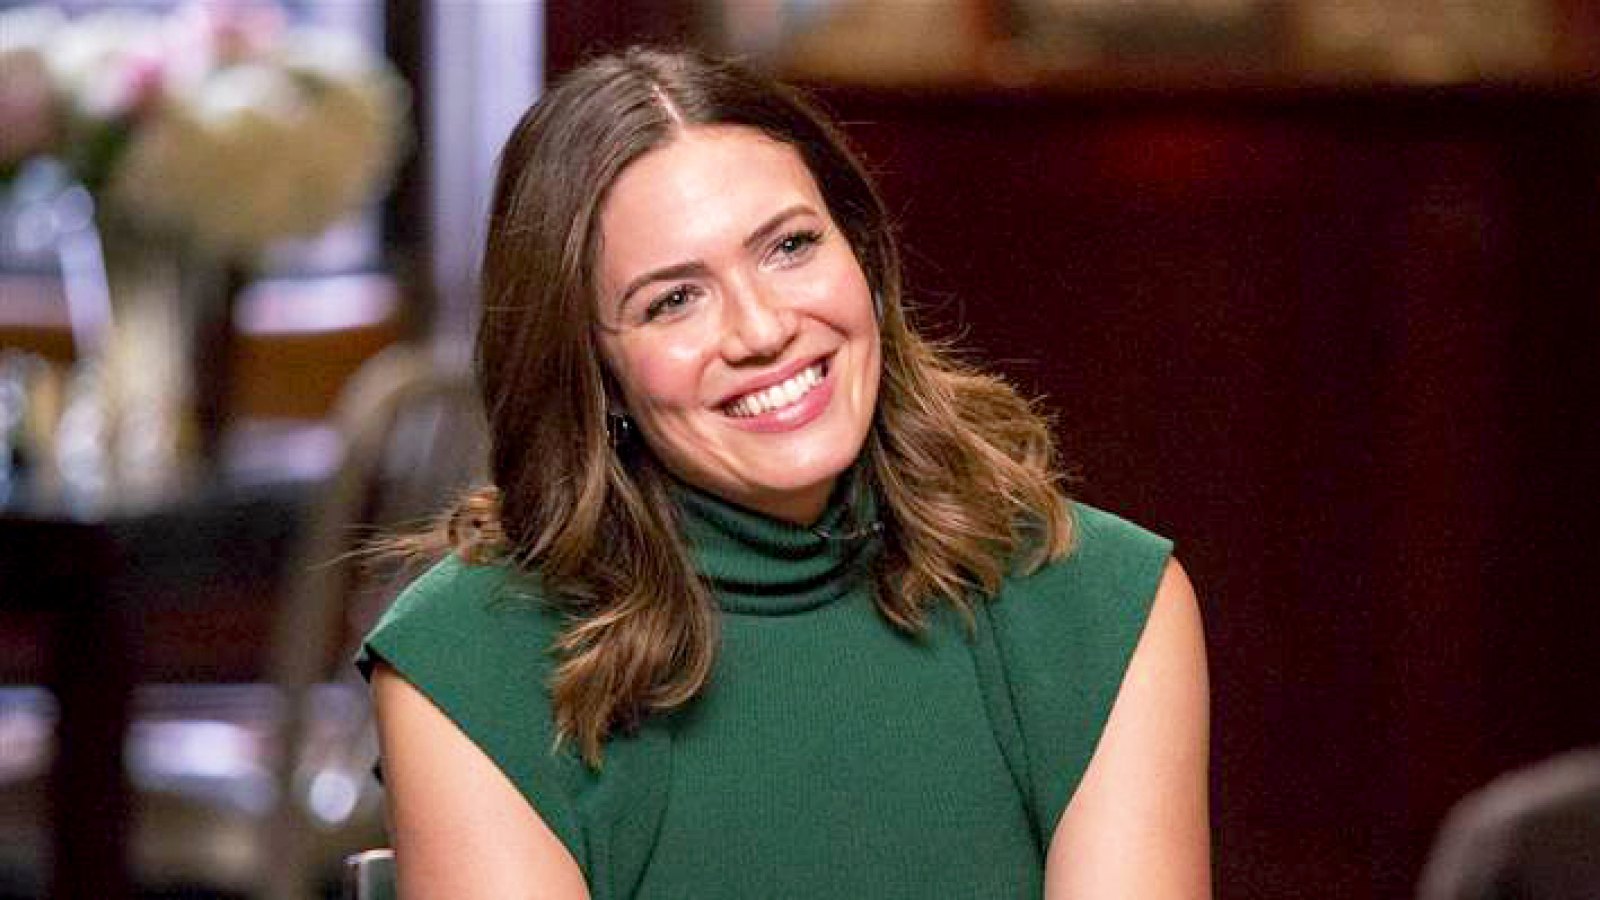 Mandy Moore on Today show